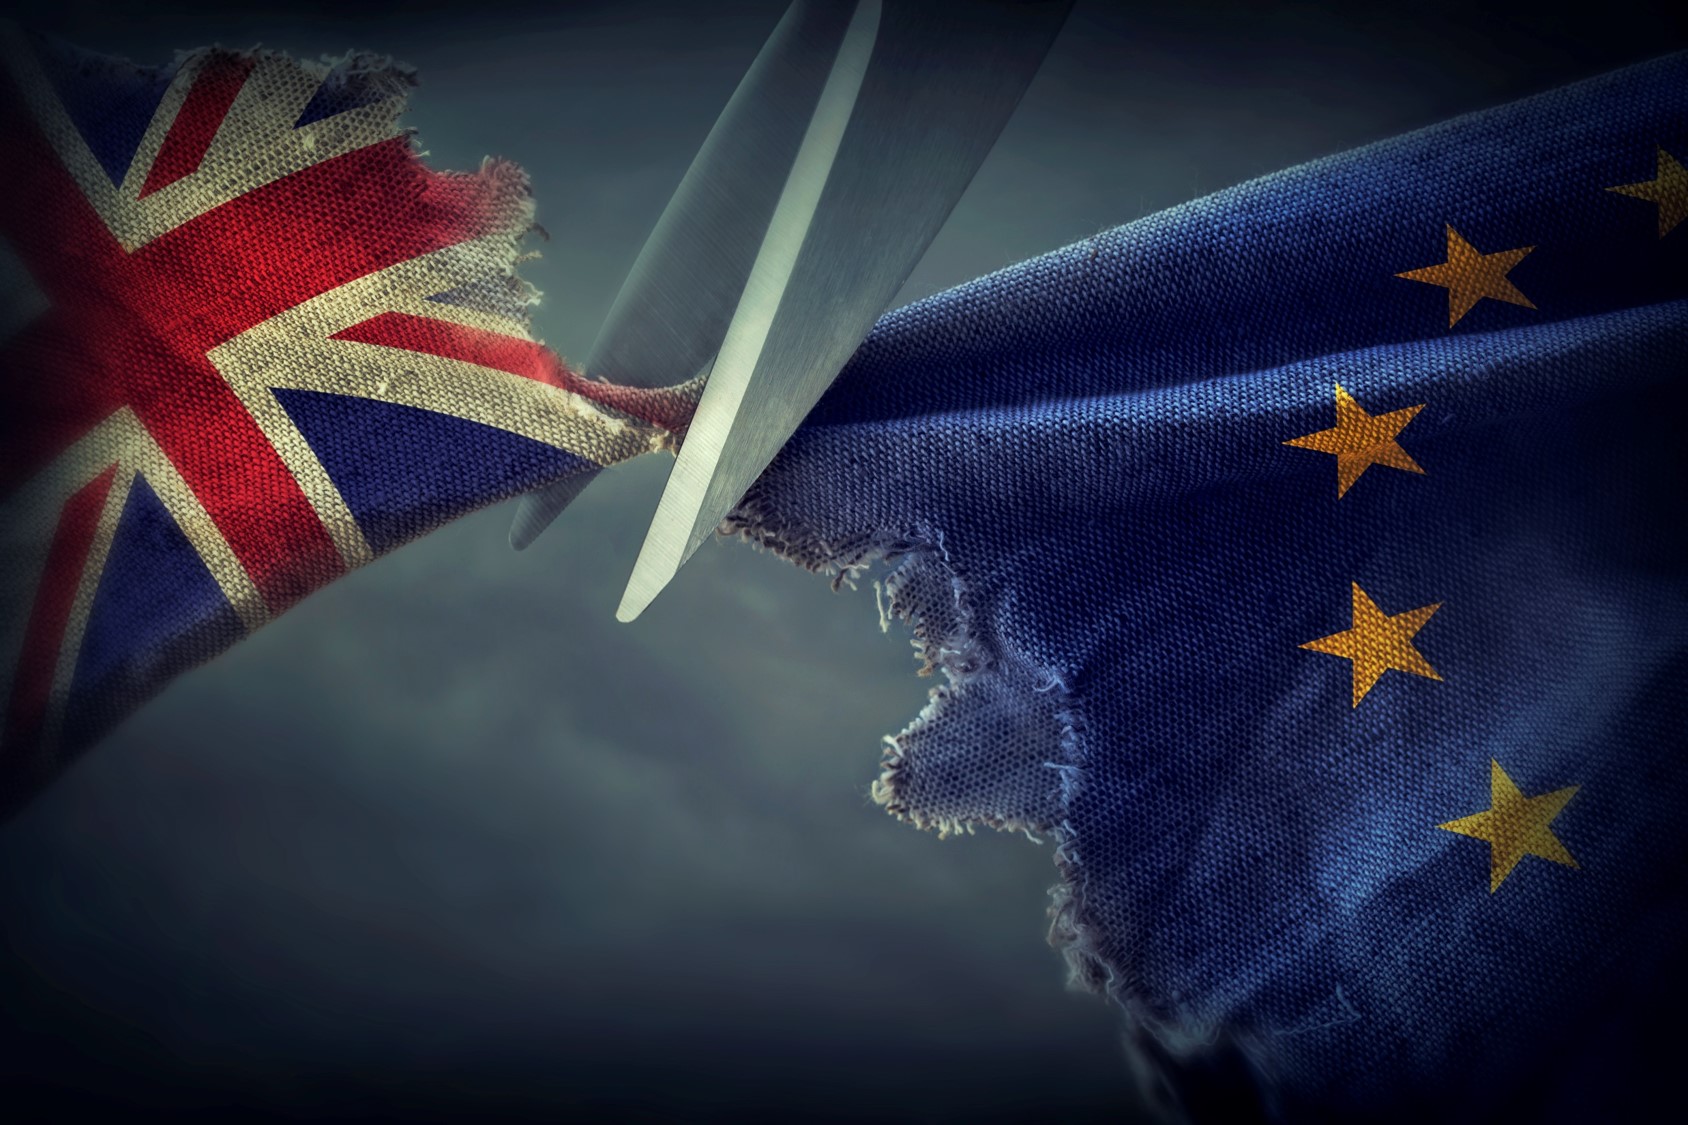 No-Brexit speculation leaks from FX to equities